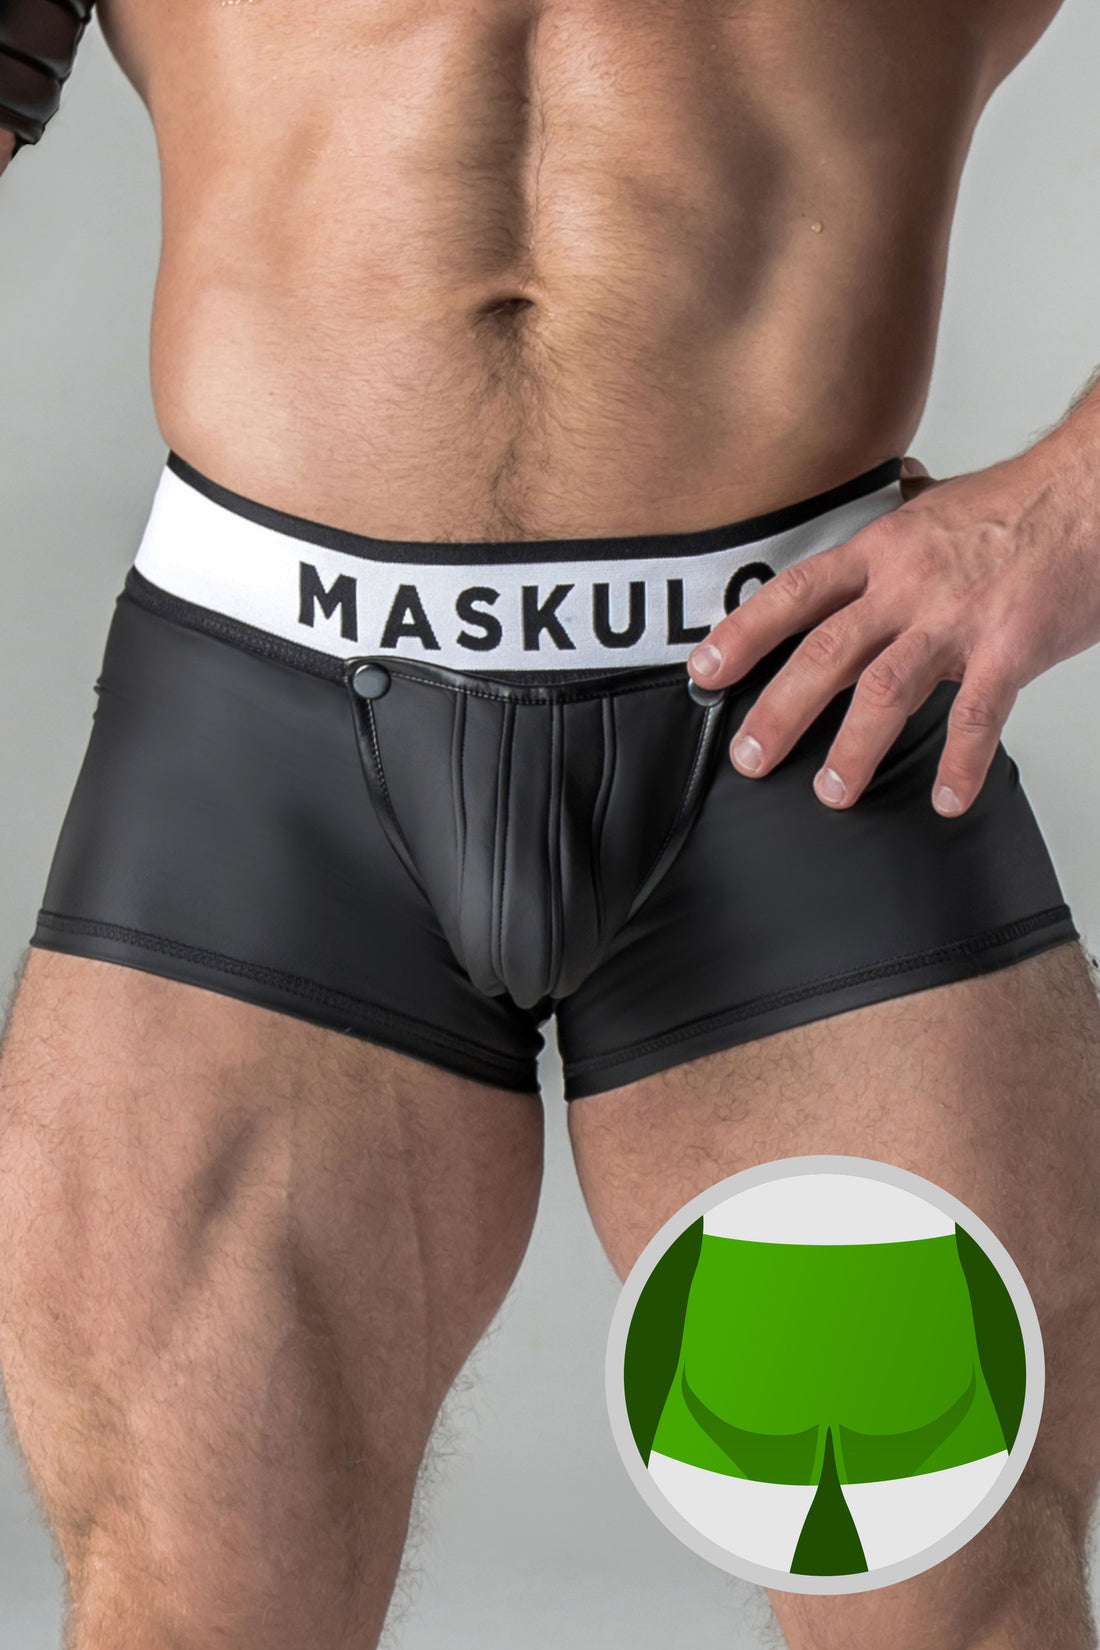 Armored. Rubber Look Trunk Shorts. Detachable Pouch. Black